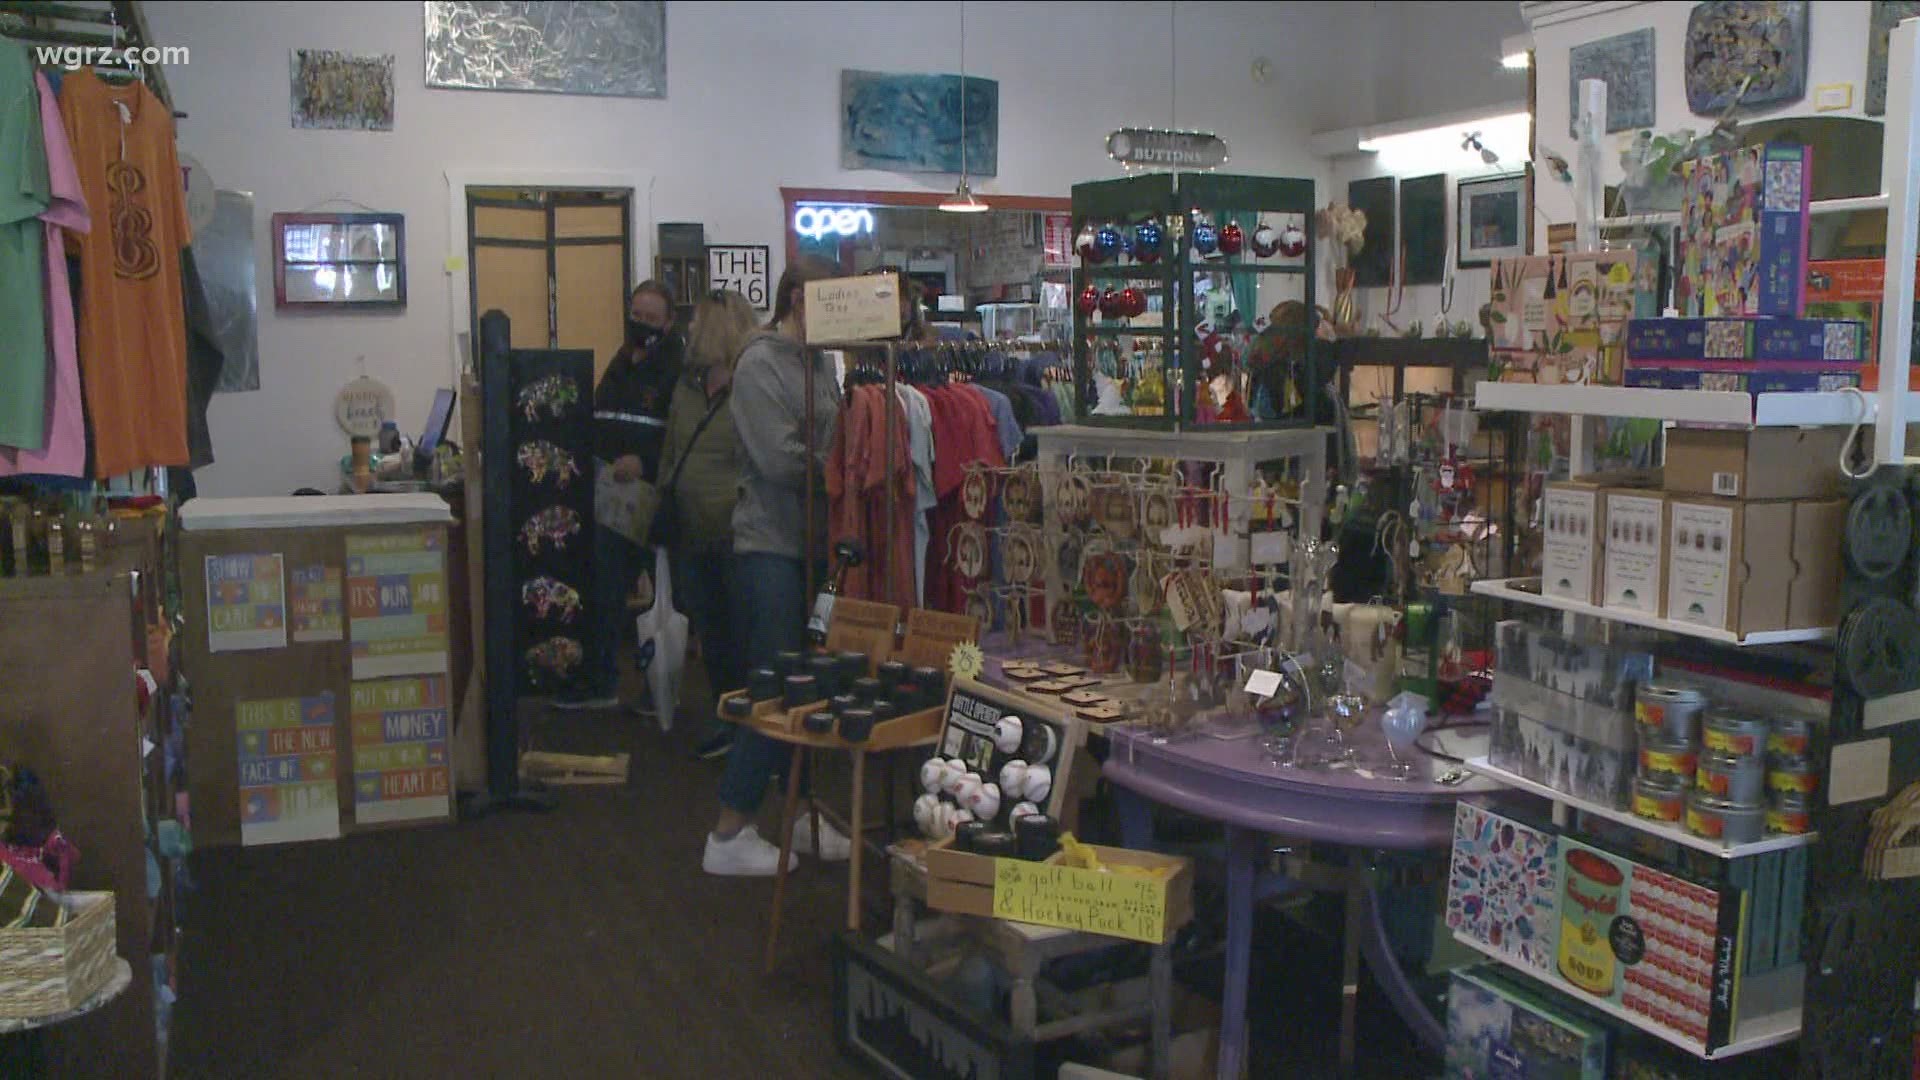 Western New Yorkers put an emphasis on "local" today, by showing their support on this small business Saturday.